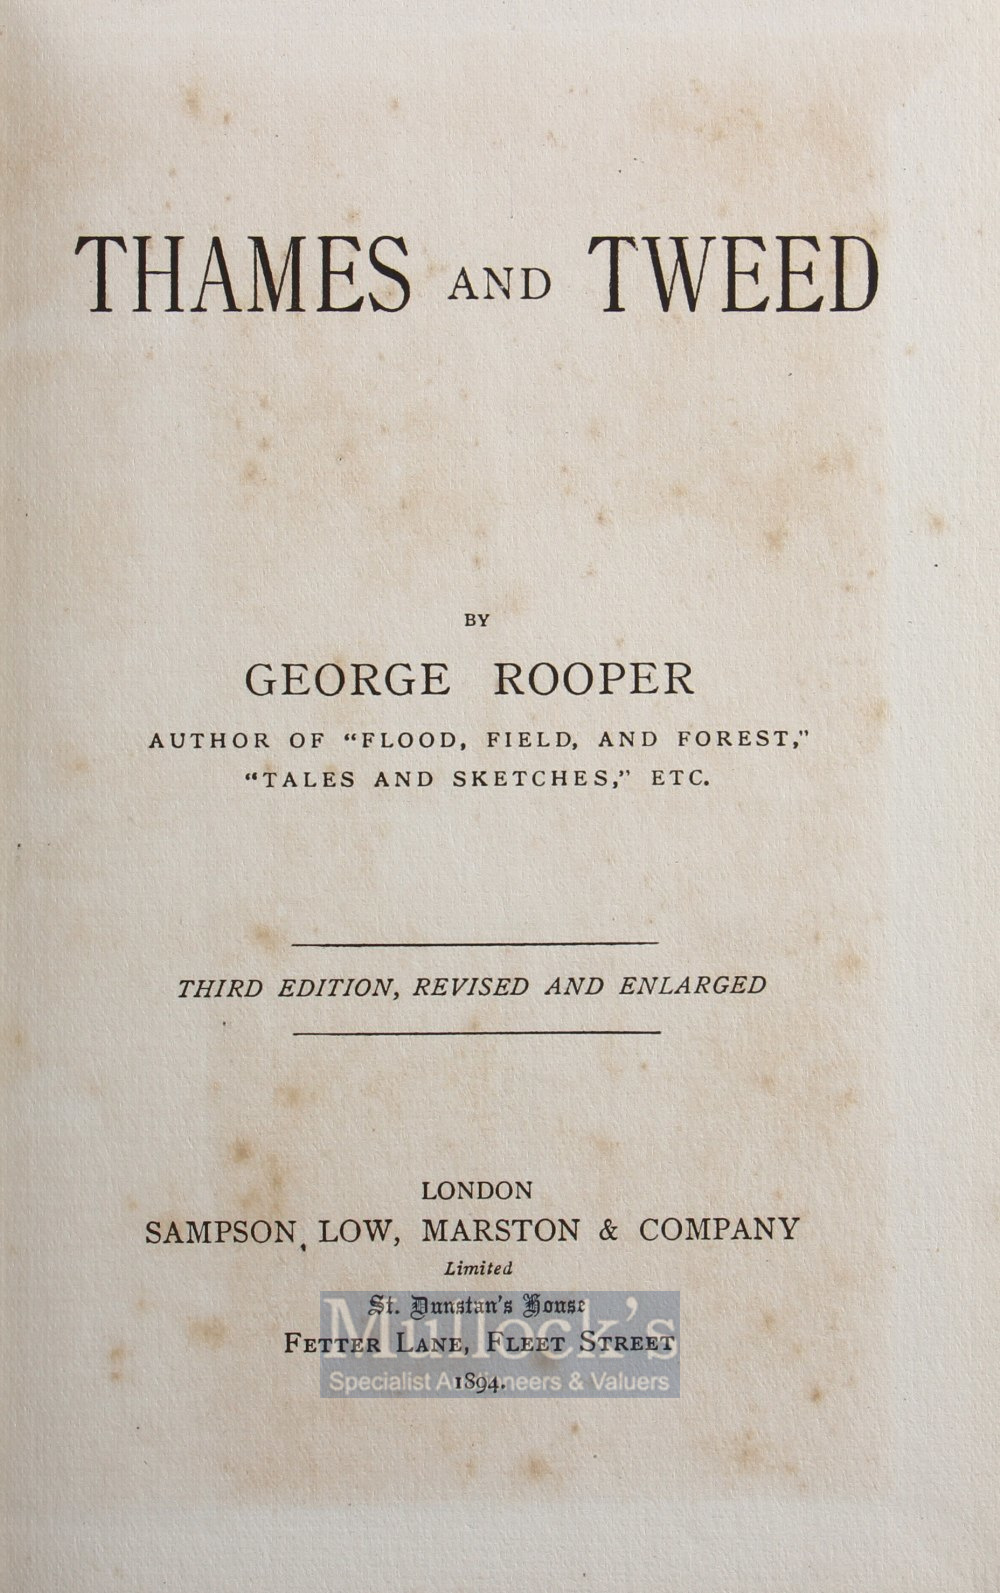 Rooper George – Thames and Tweed, London 1894, 3rd edition revised and enlarged, original cloth - Image 2 of 2